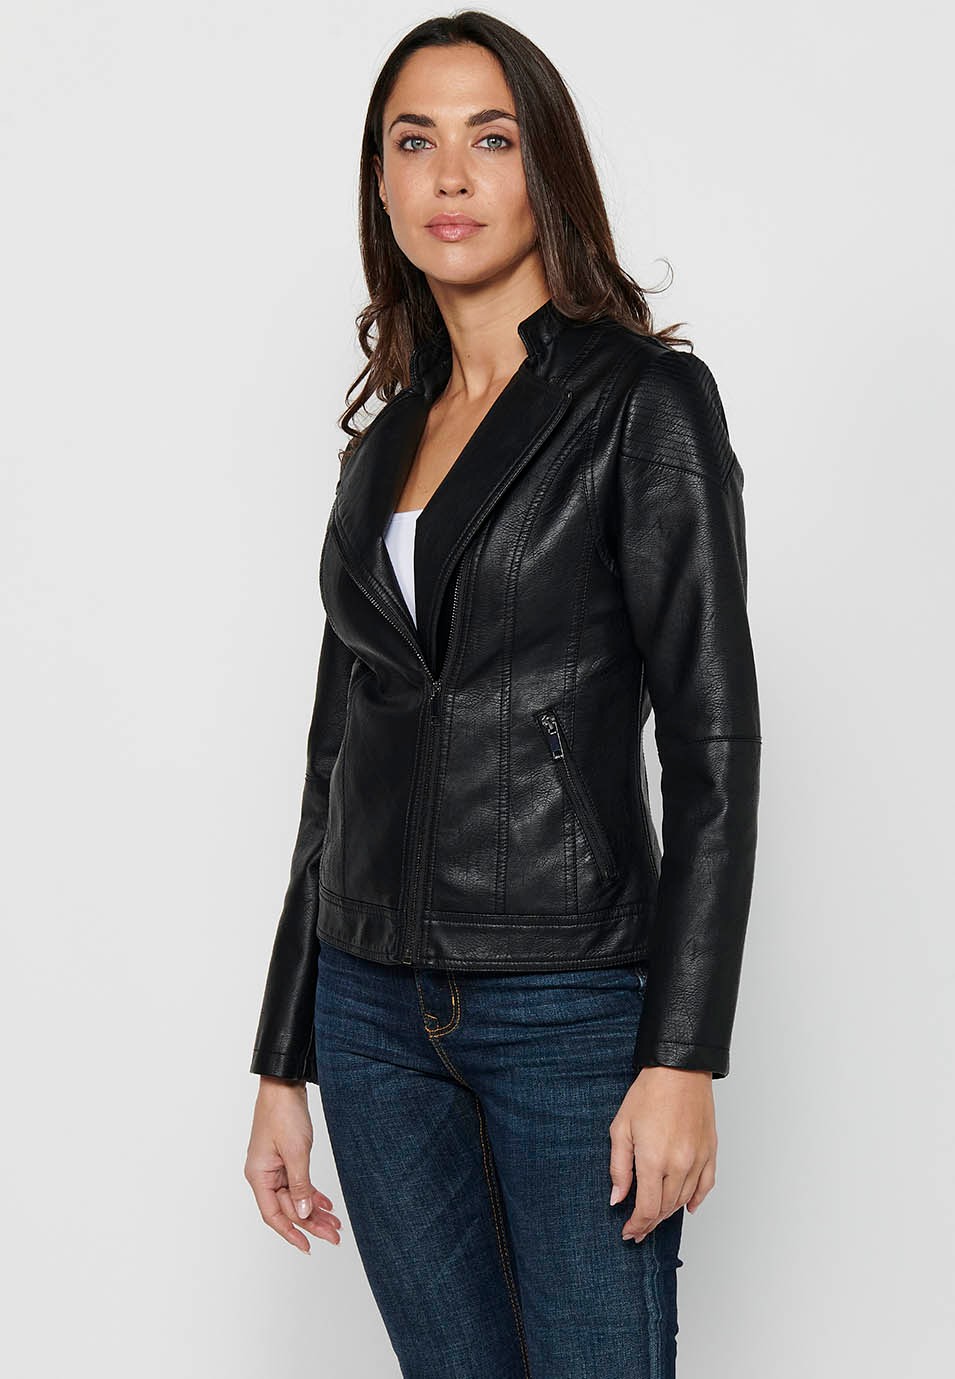 Long-sleeved high-neck jacket with front zipper closure and details on the shoulders with front pockets in Black for Women 8